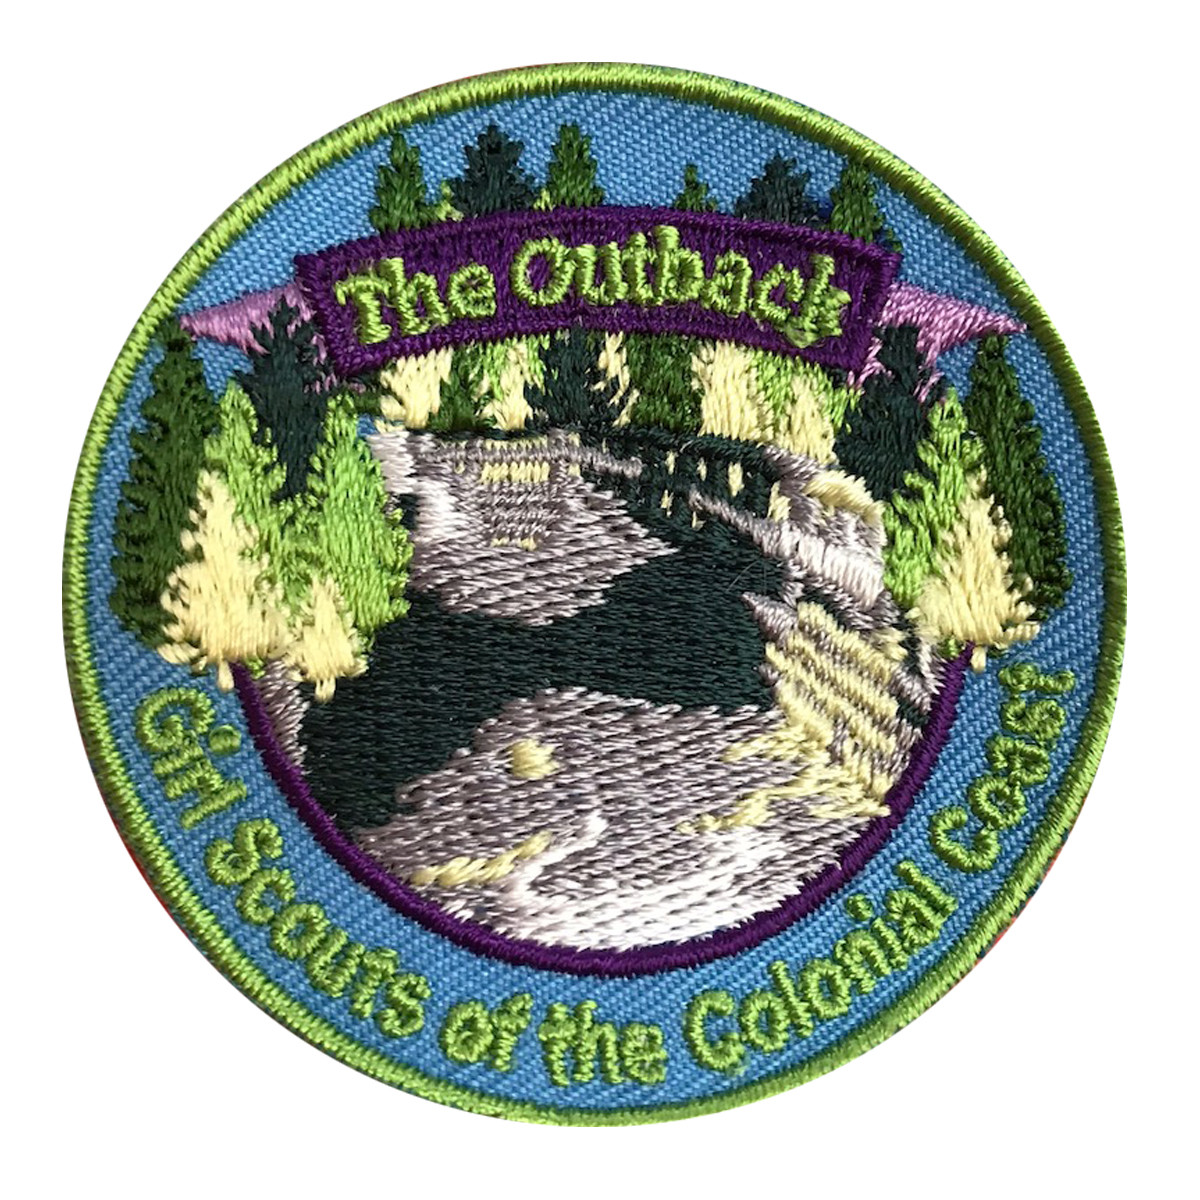 The Outback Patch